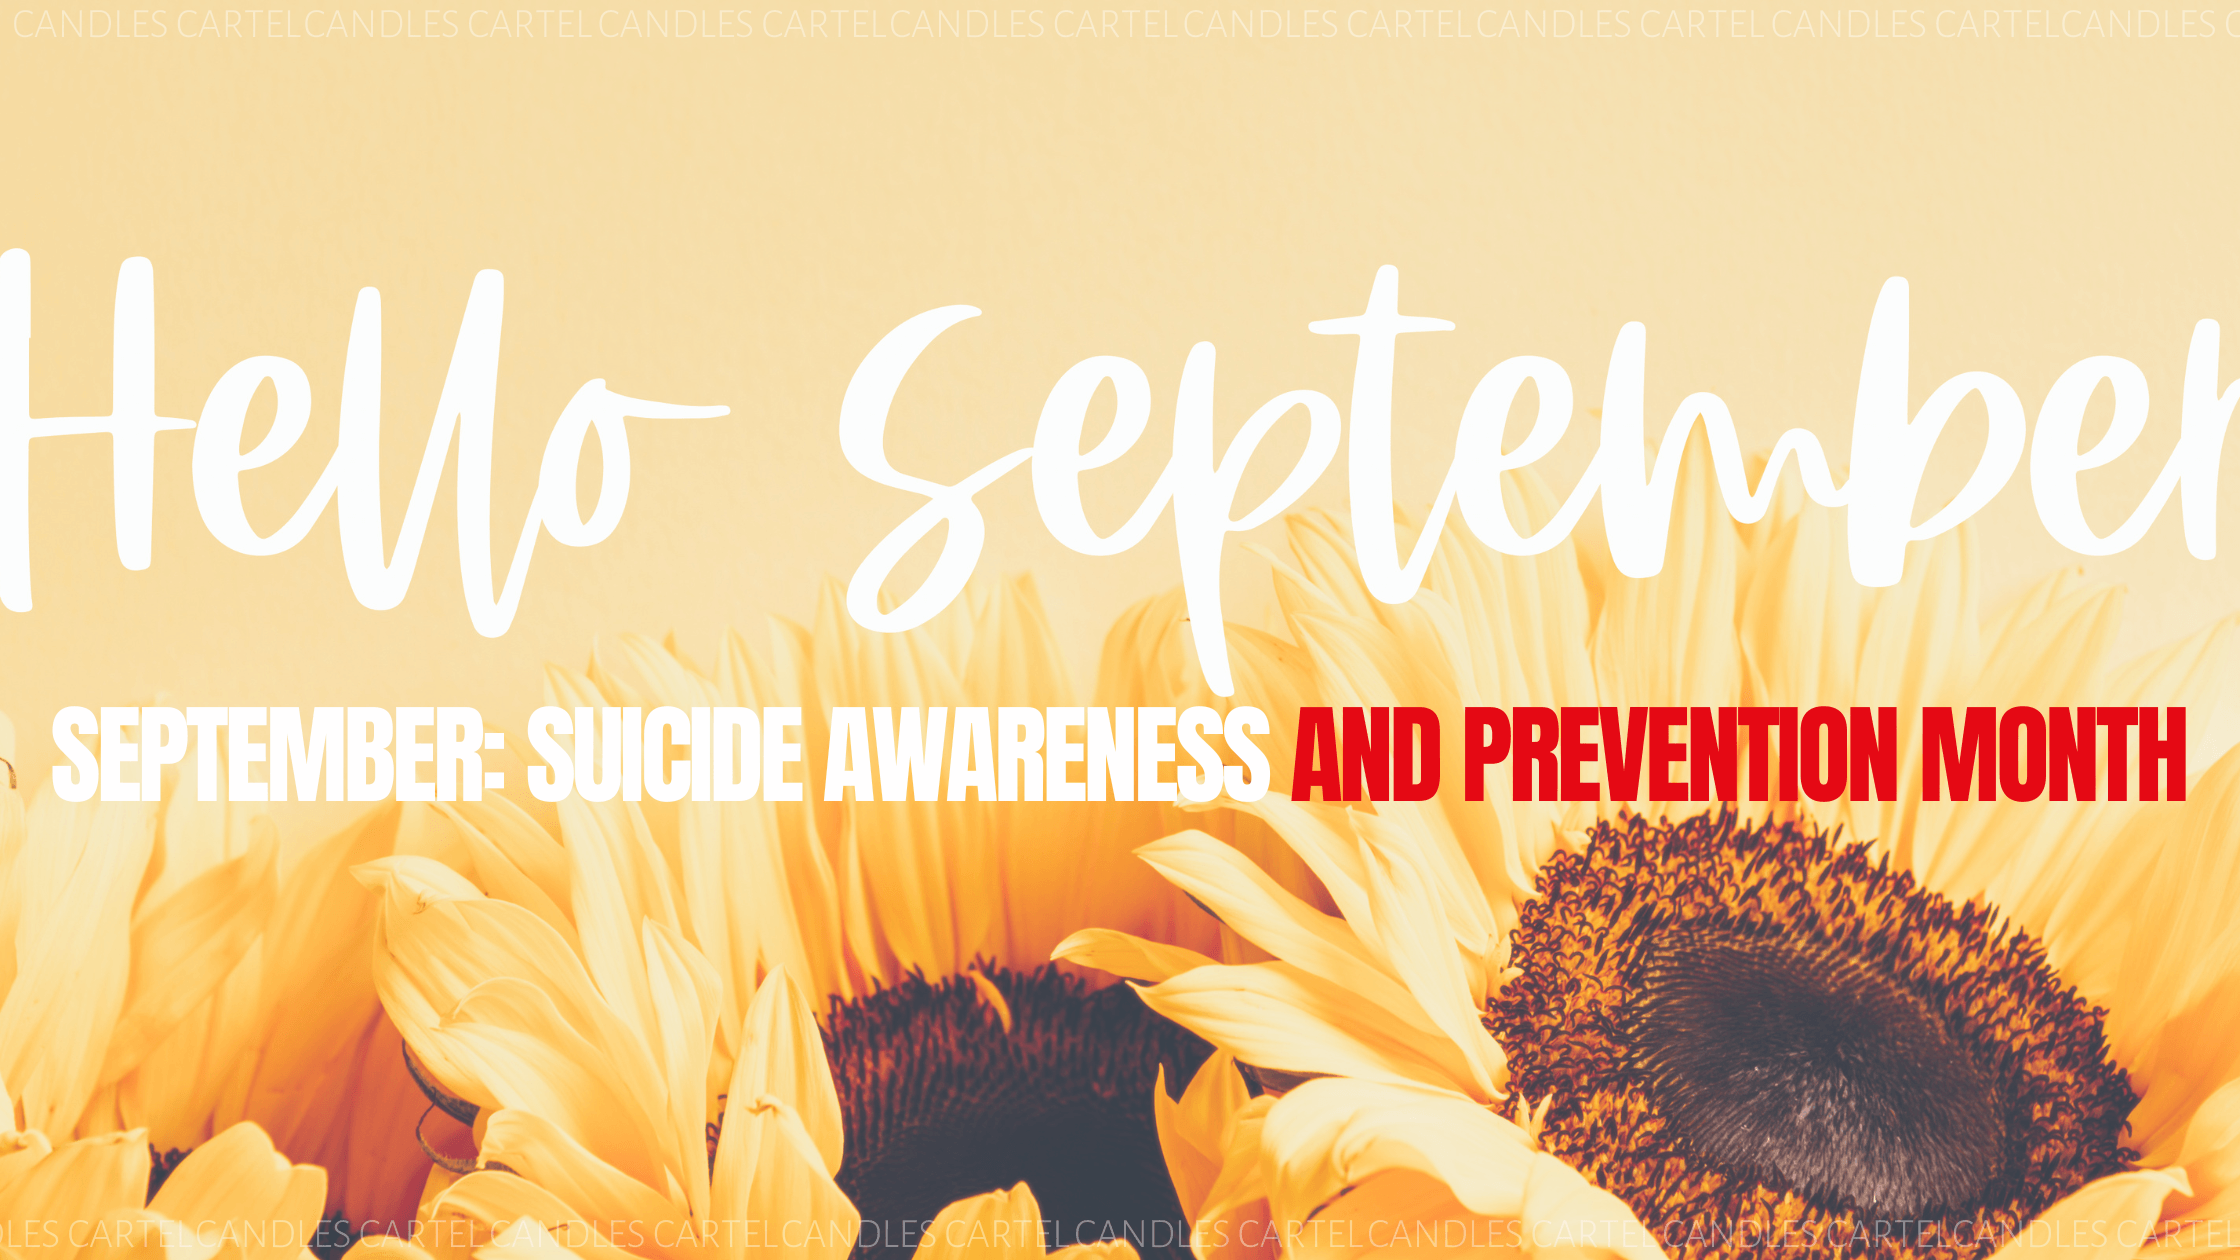 September: Suicide Awareness and Prevention Month  - Blog Article